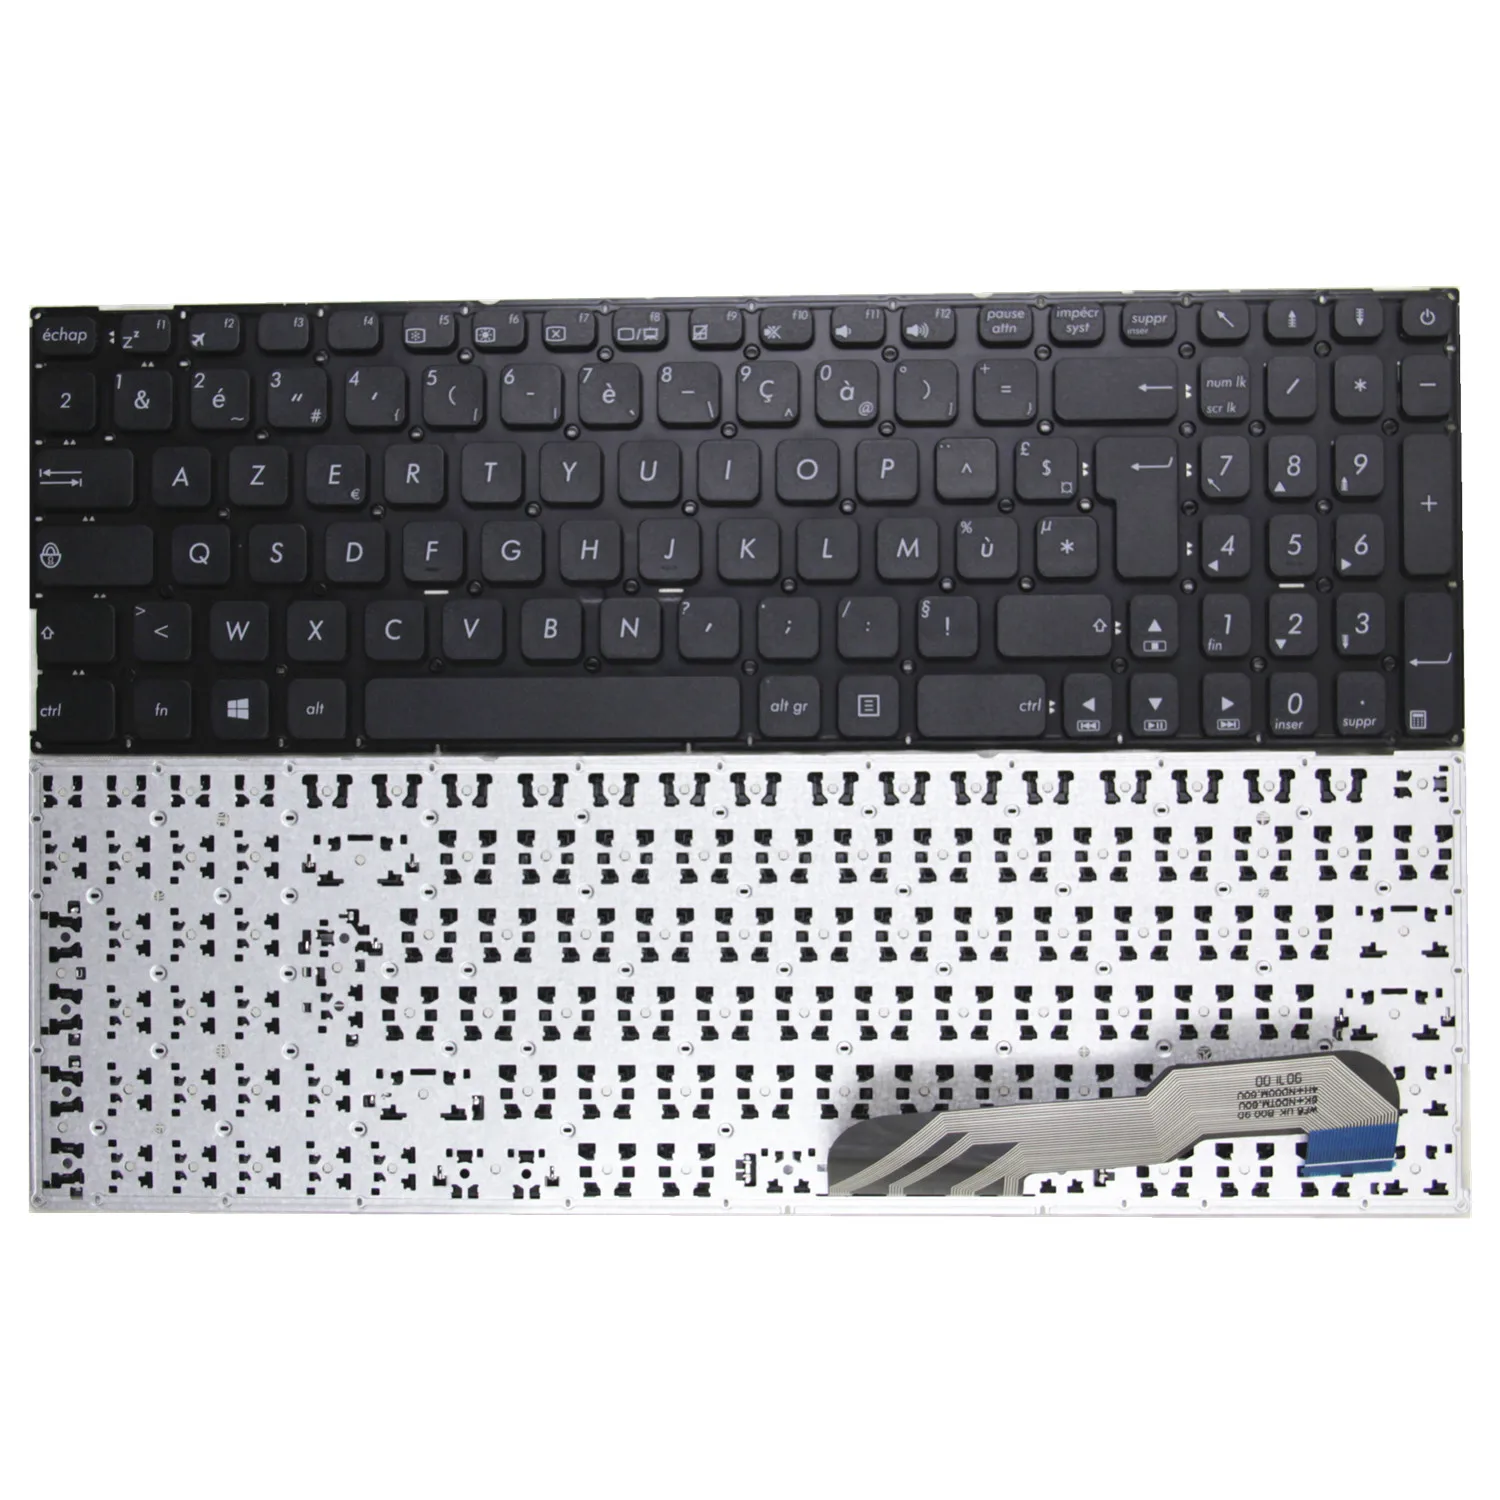 

100%NEW Original French Keyboard For Asus X541S R541U X541L X541SA A541U D541S VM592U F541 F541U FR Laptop AZERTY